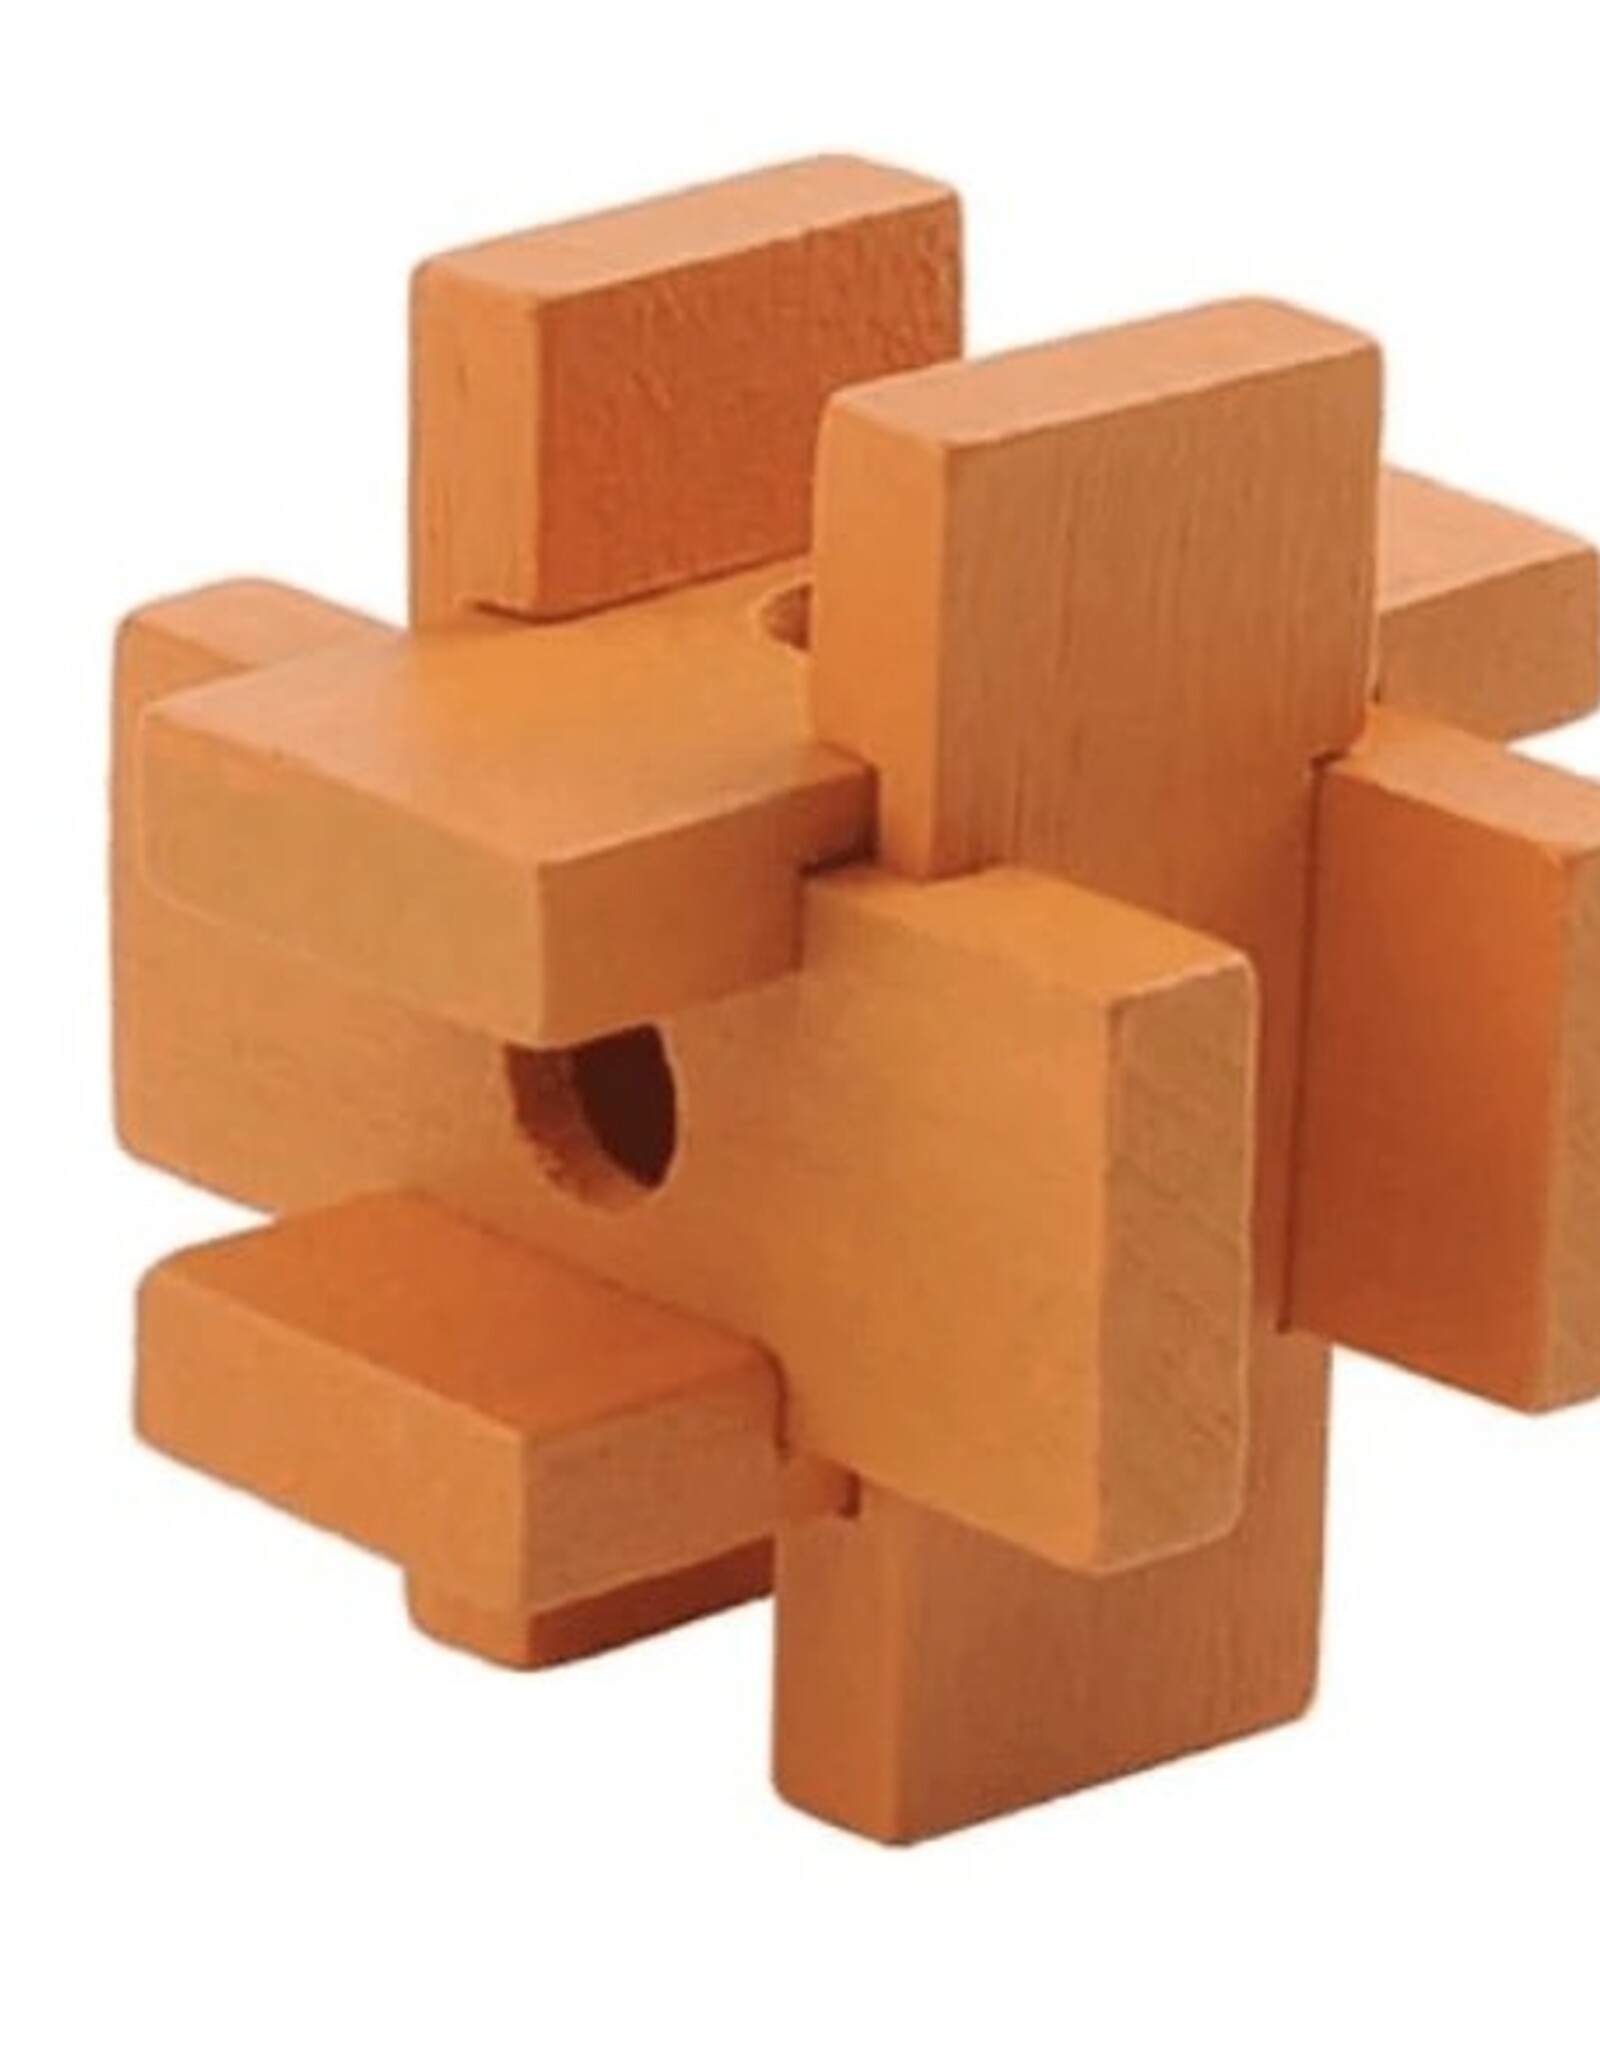 Streamline MINI 3D WOODEN PUZZLE Assorted*